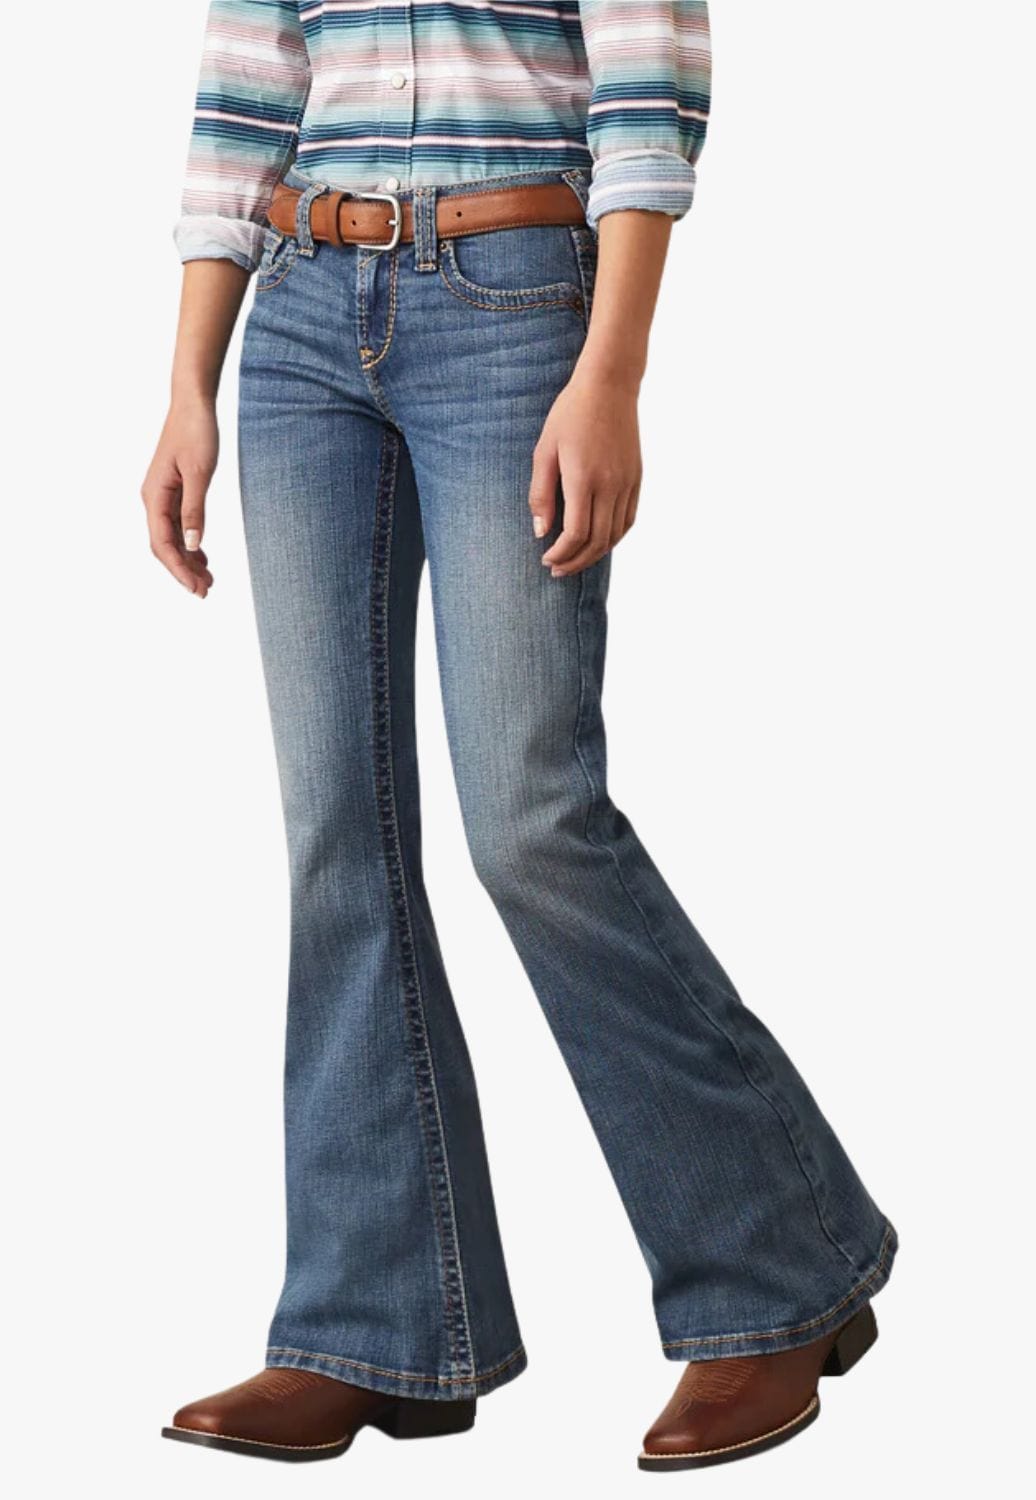 Ariat CLOTHING-Girls Jeans Ariat Girls REAL Hallie Flare Jean